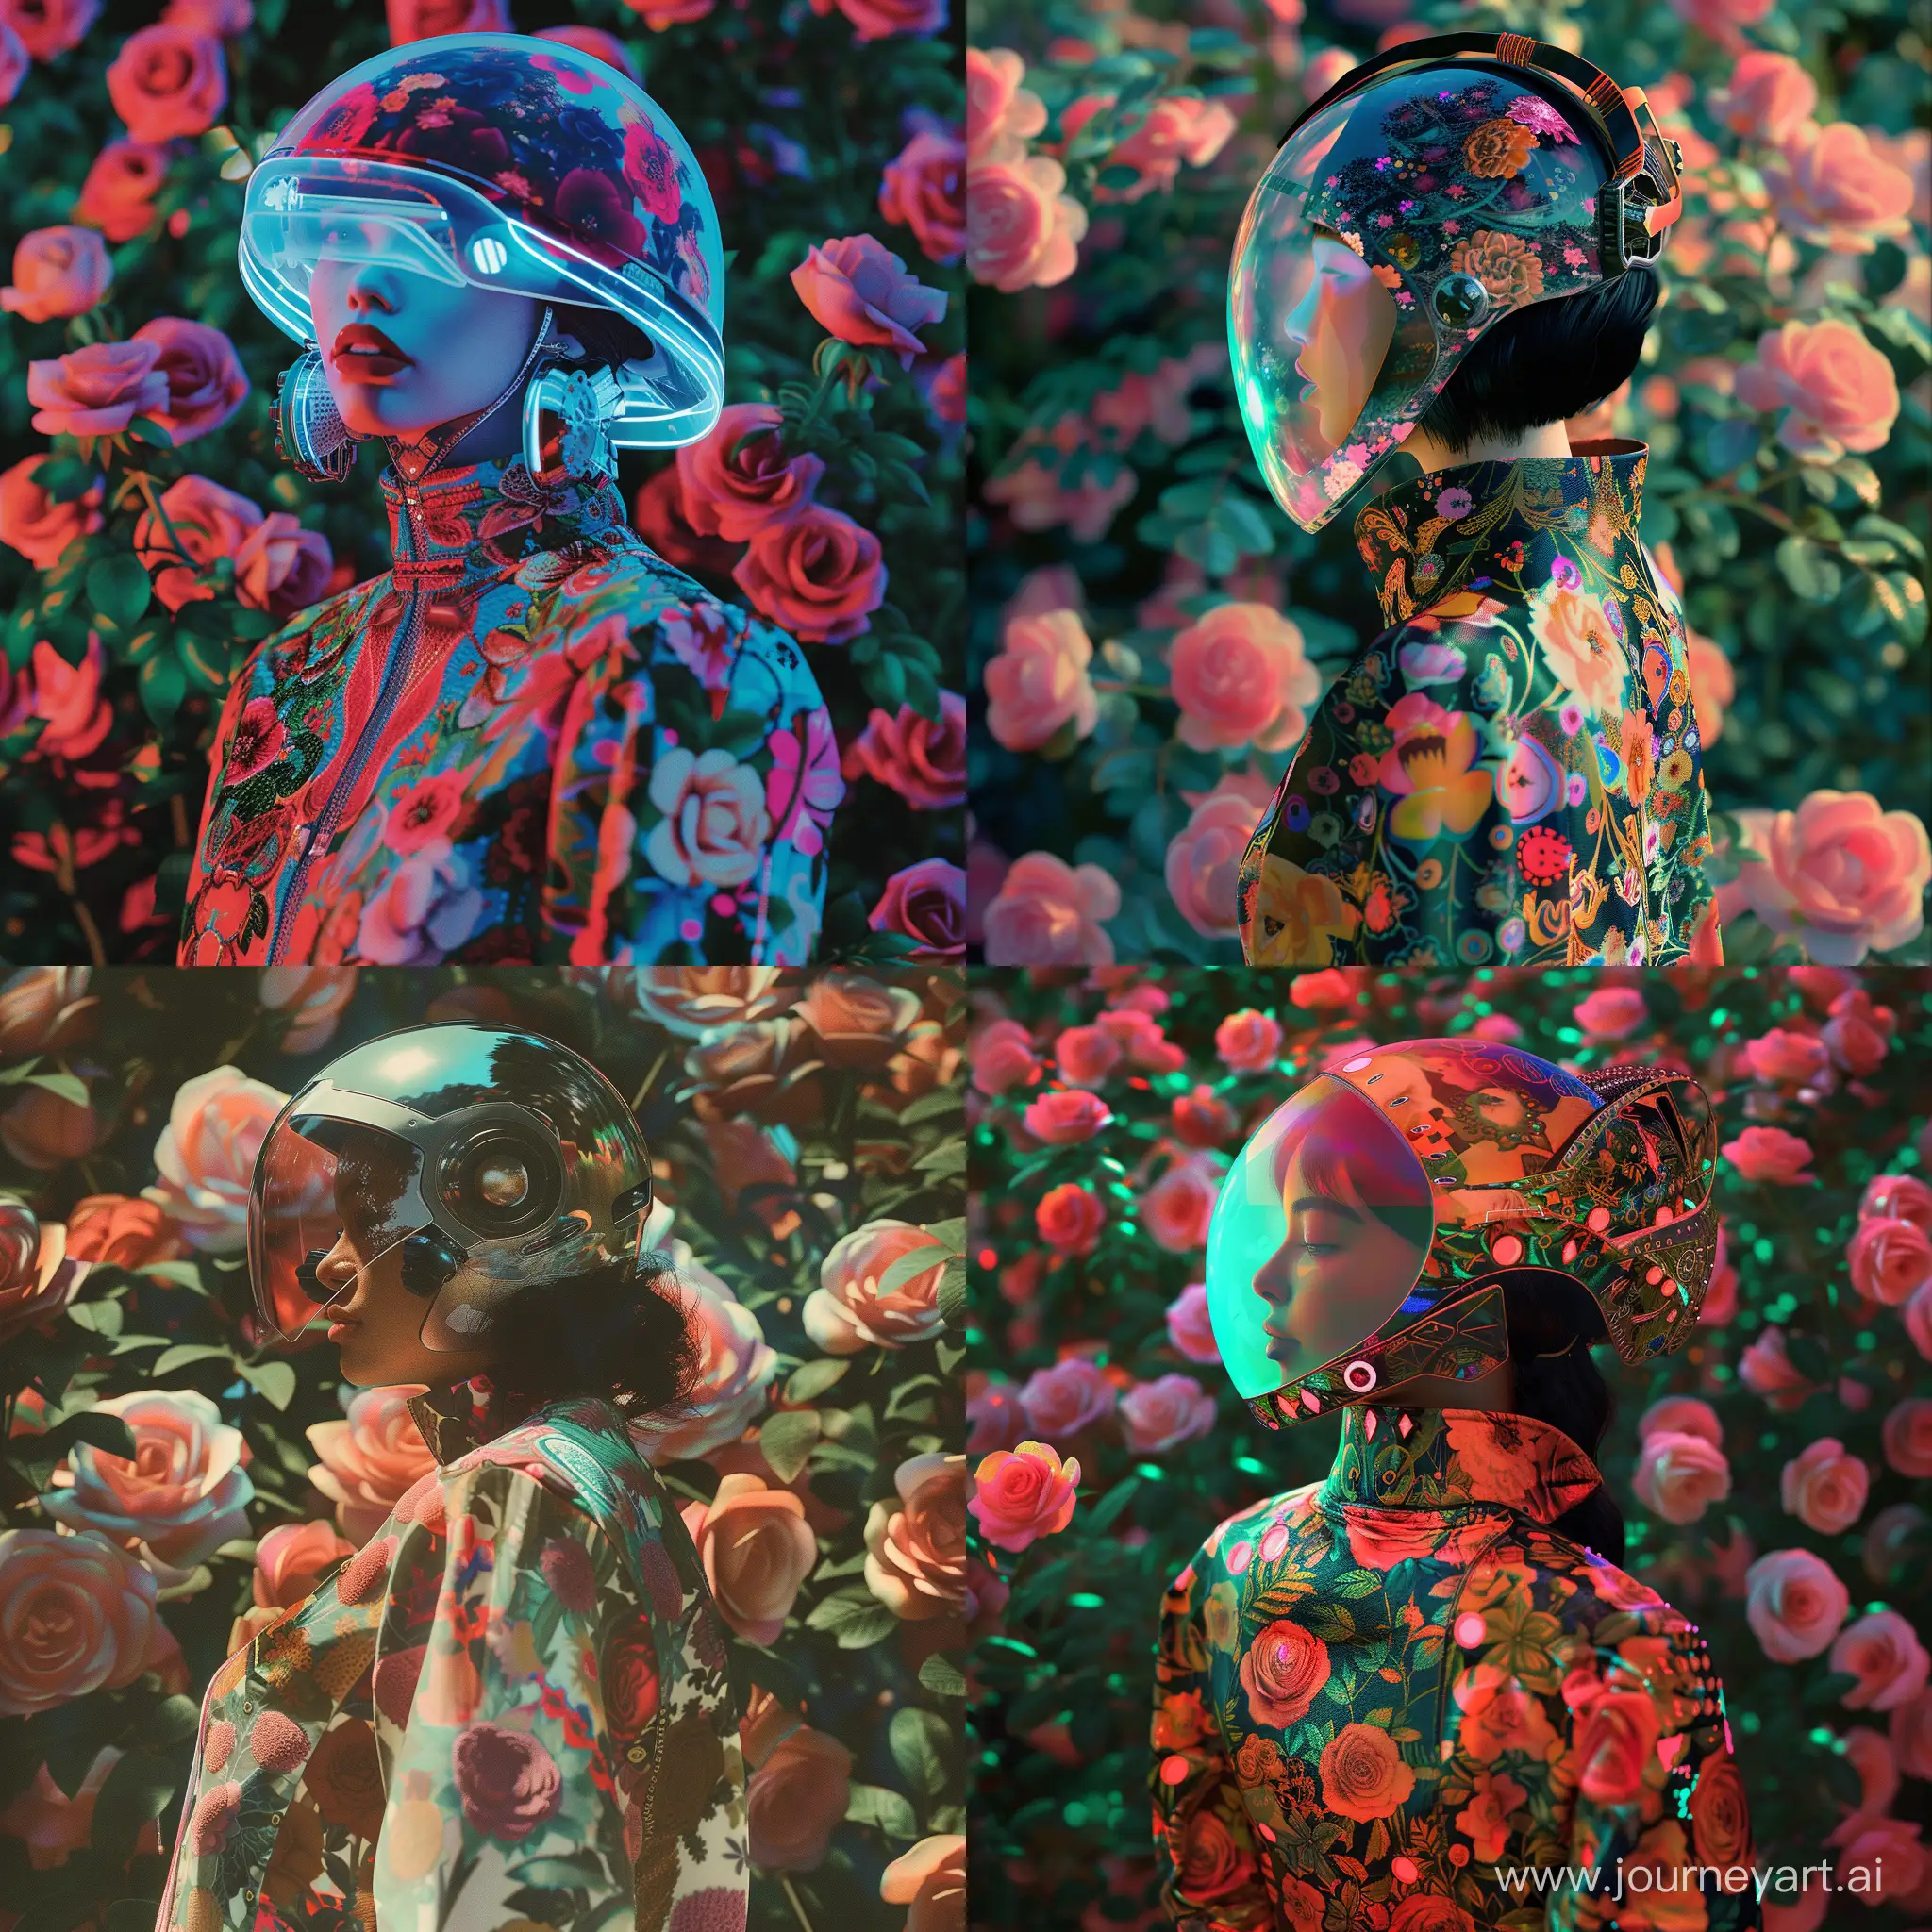 Futuristic-Woman-in-Floral-Jacket-Amid-Lush-Roses